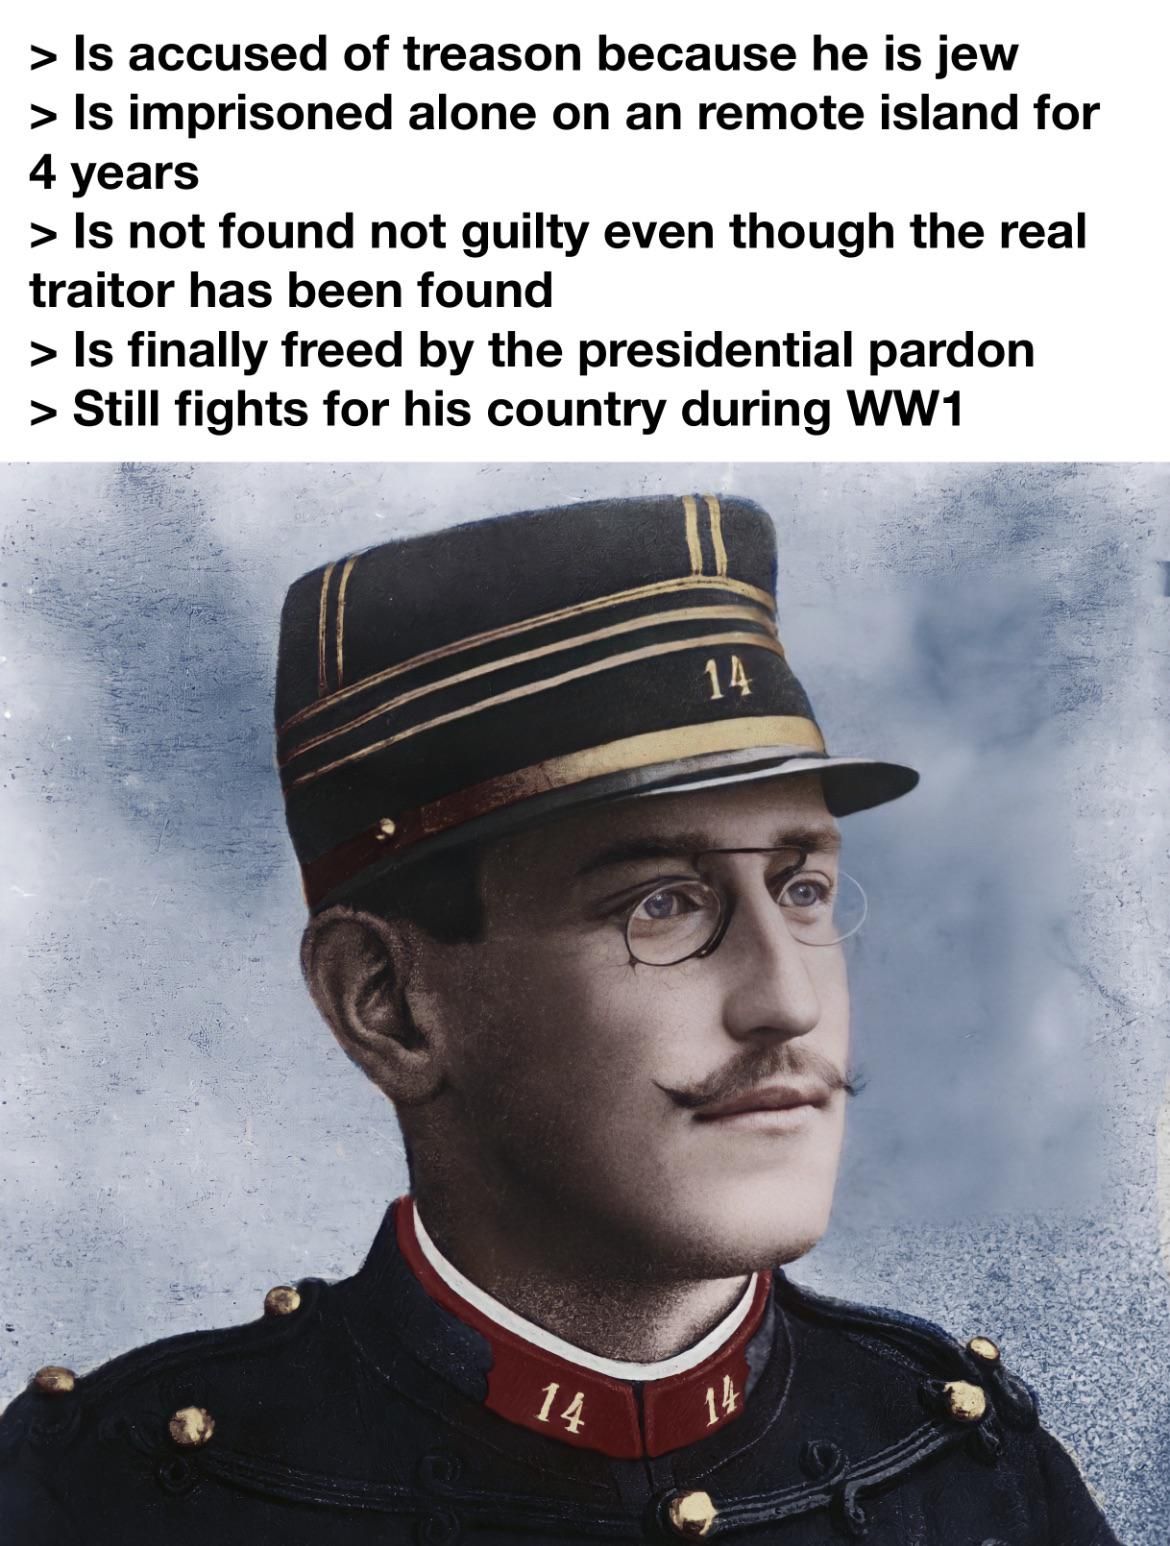 Alfred Dreyfus was really a huge Chad